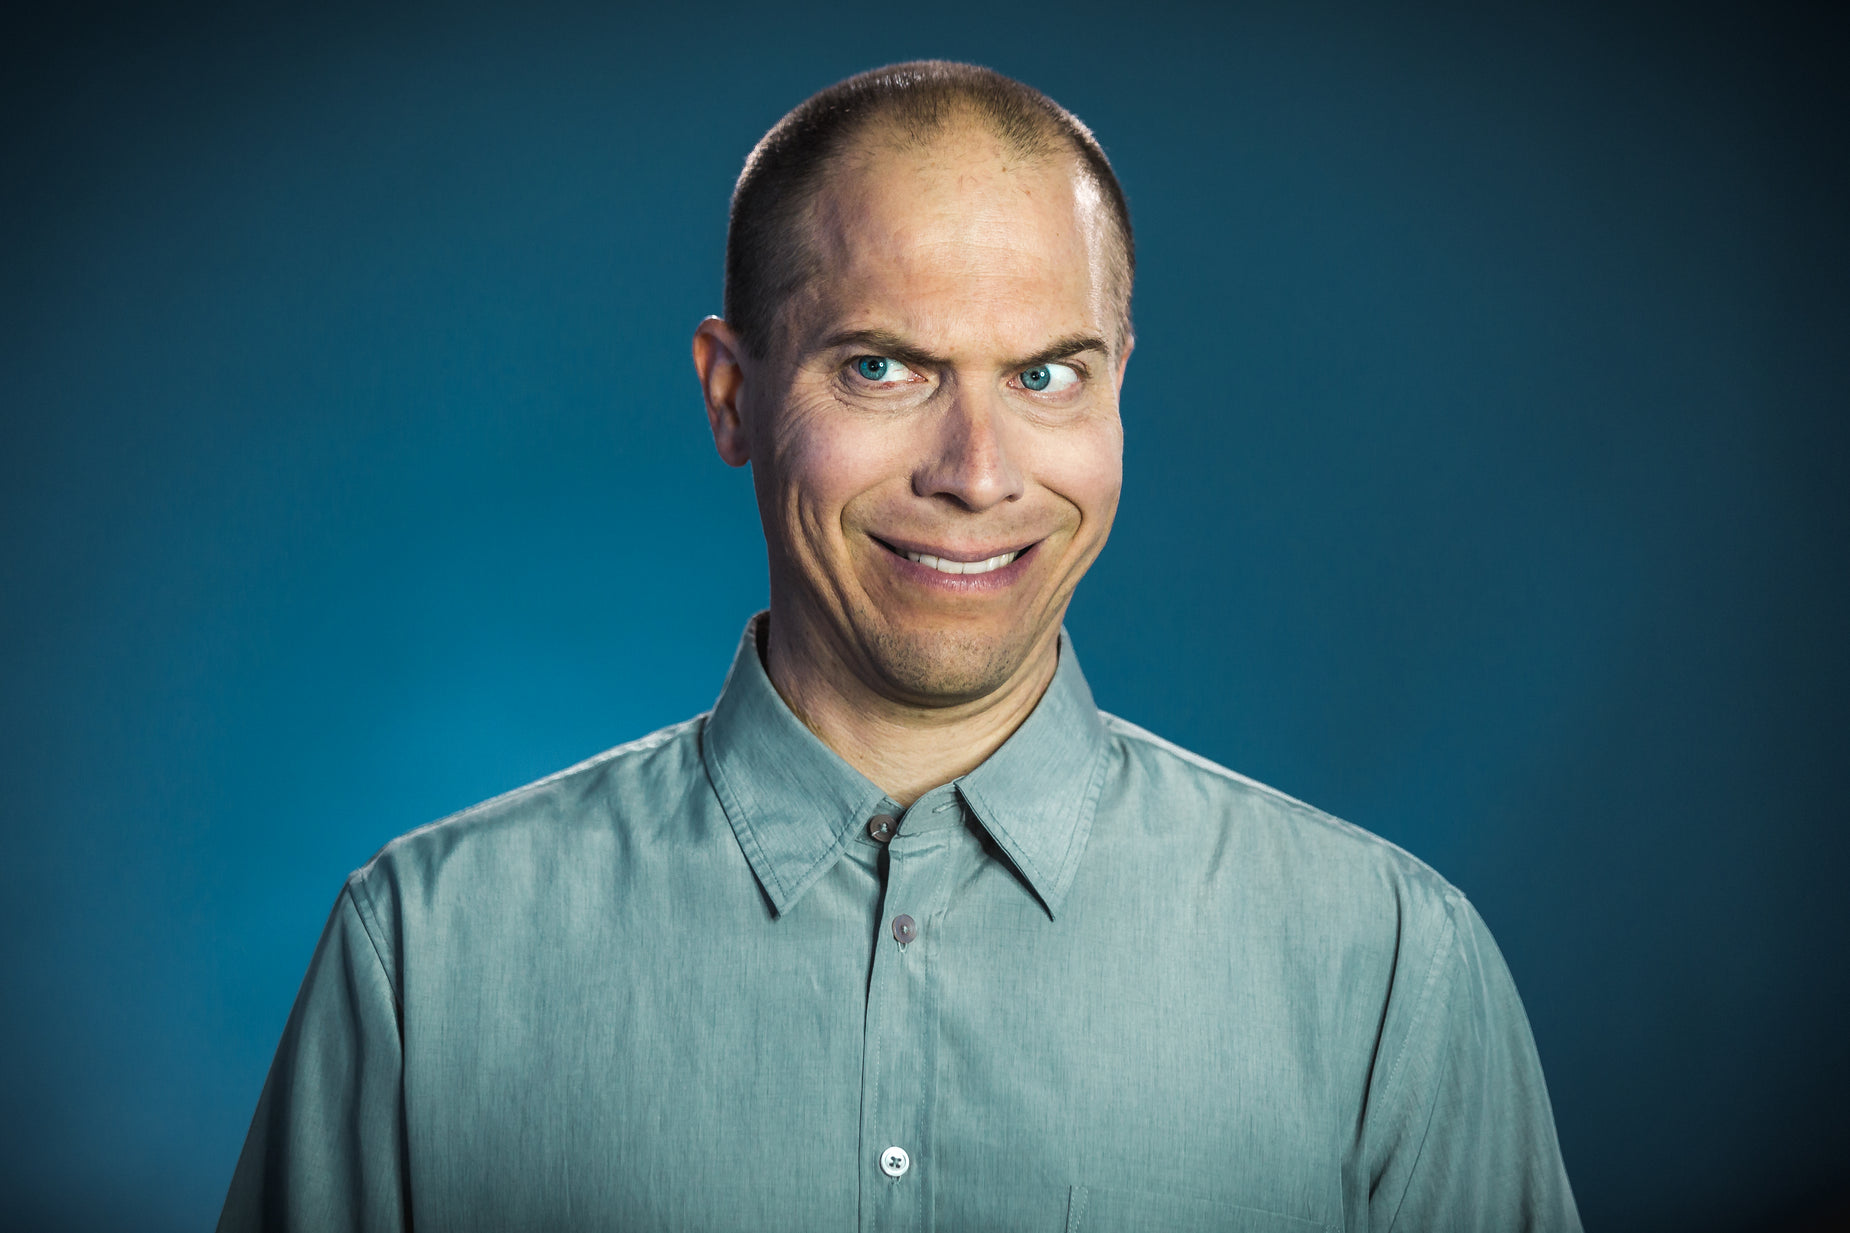 a man wearing a blue shirt has his head tilted in the middle